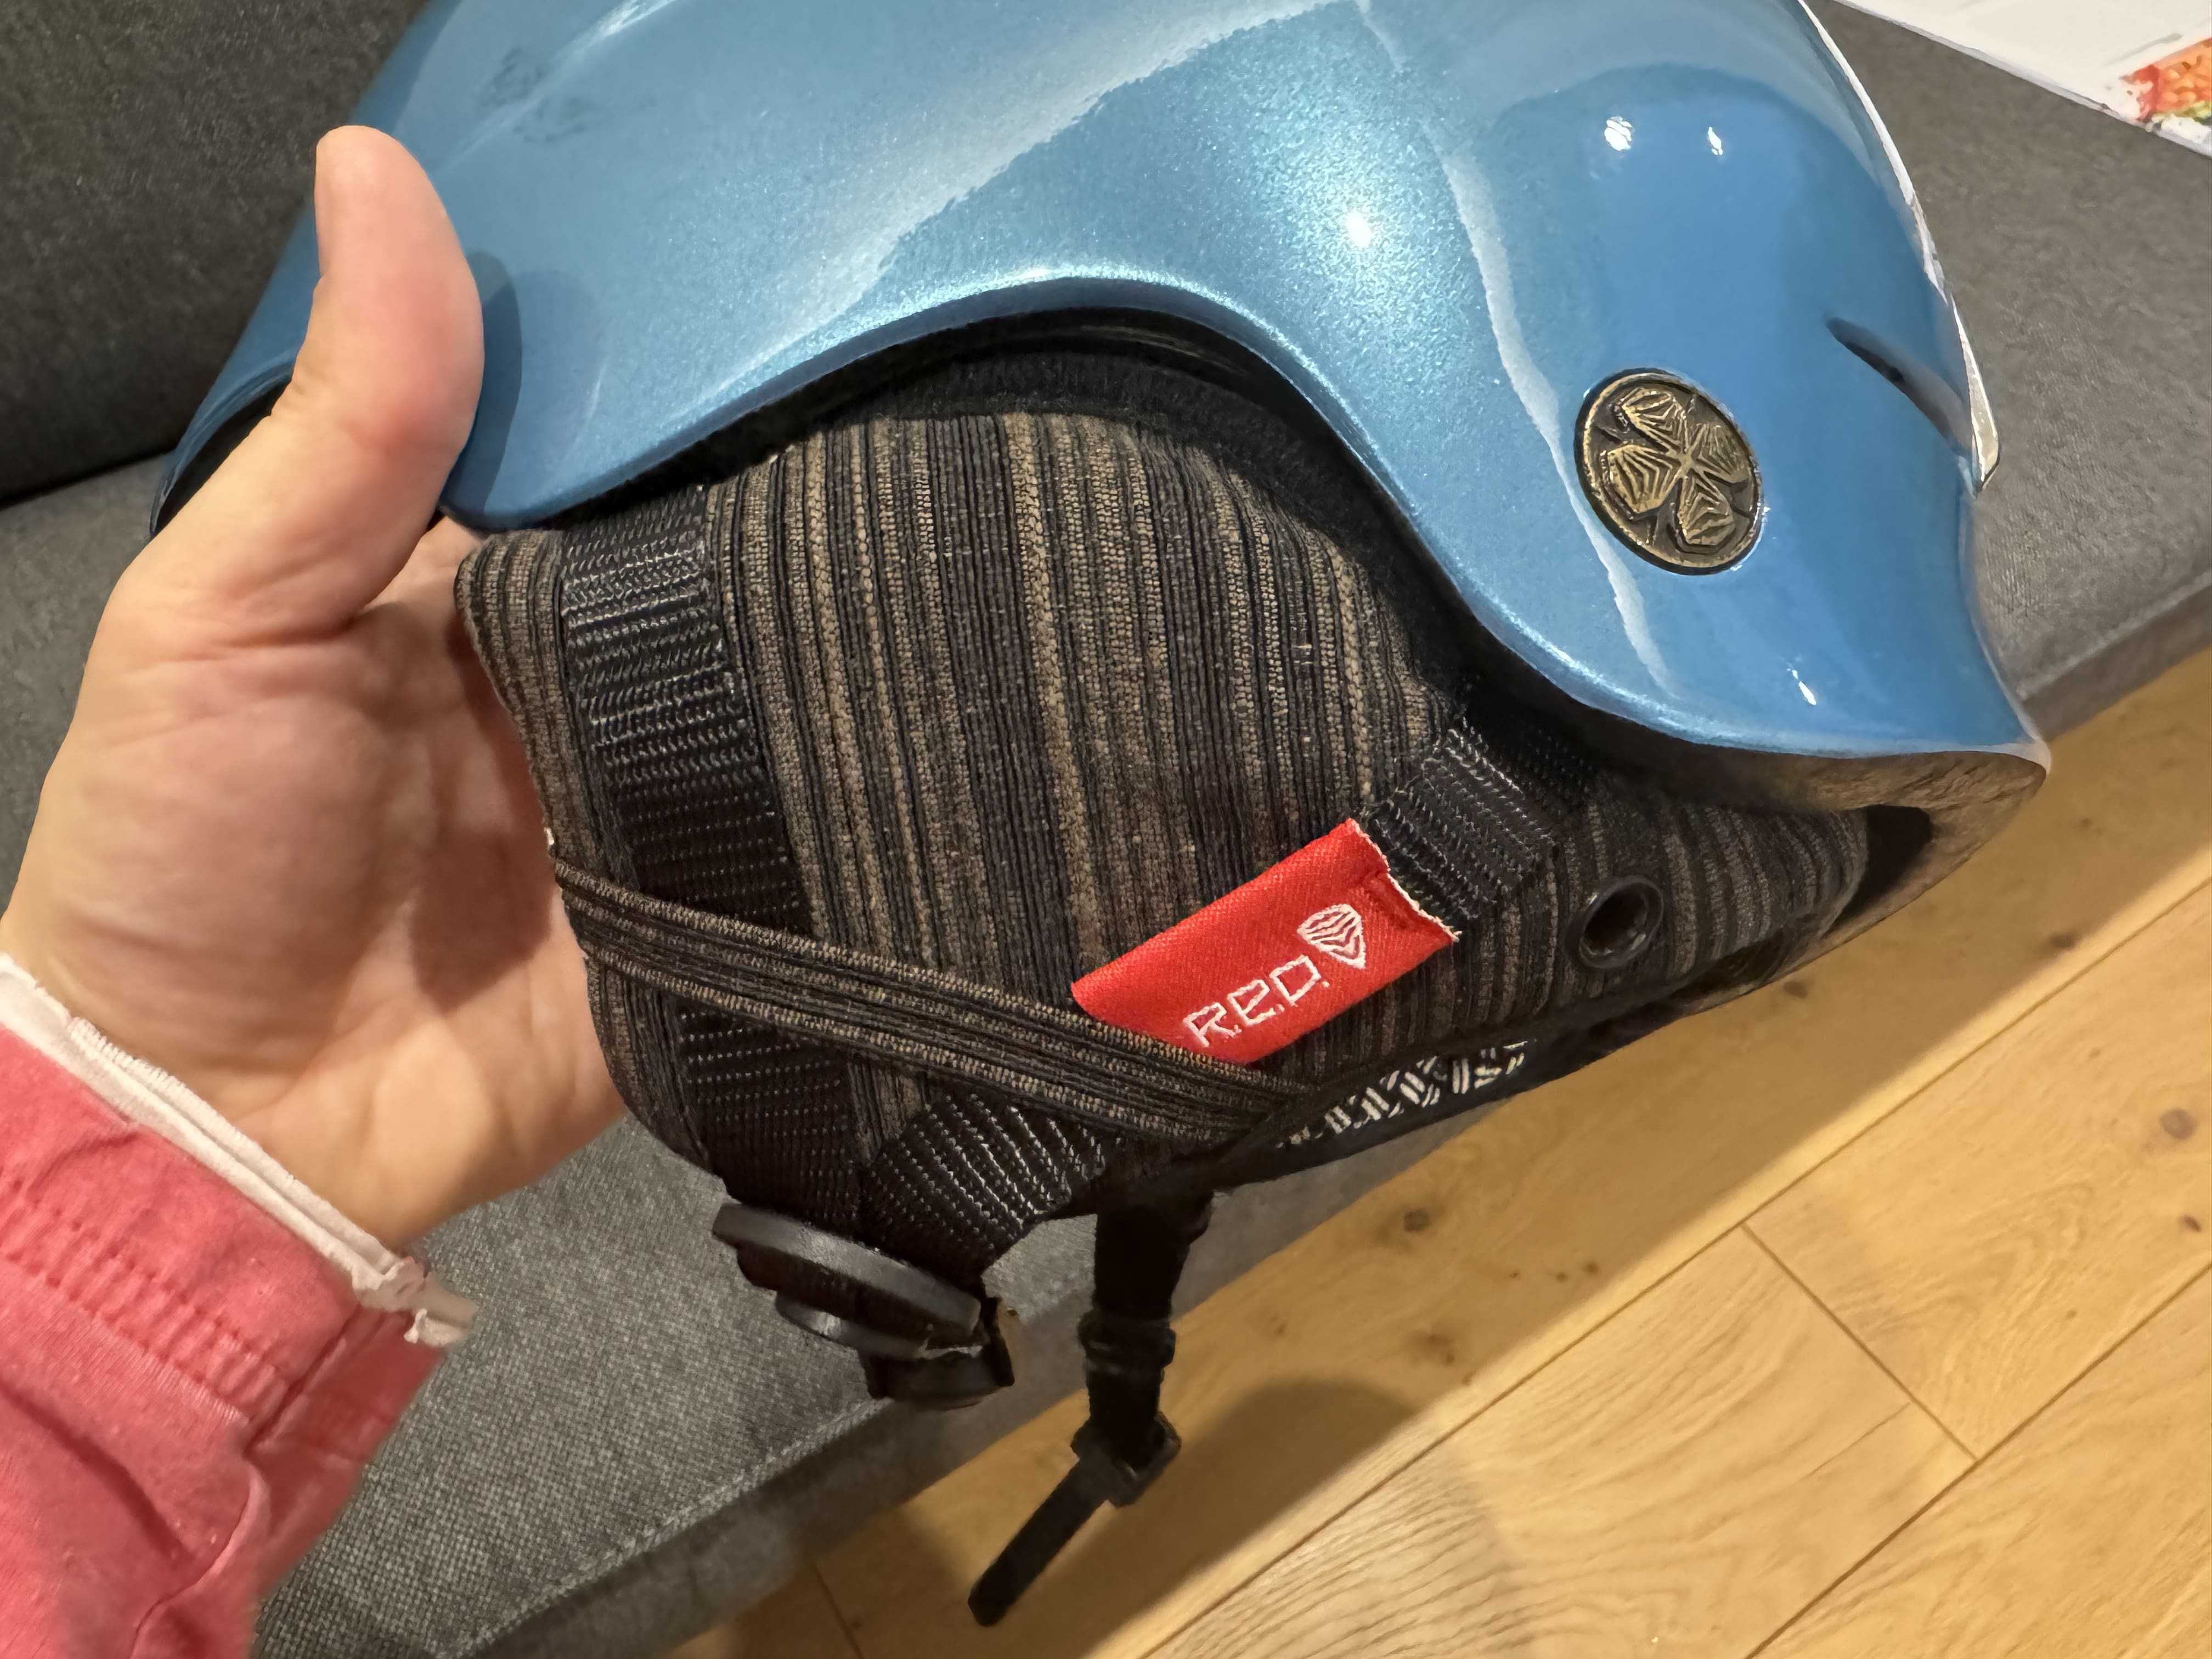 Kask snowboardowy RED Theory XL - super stan